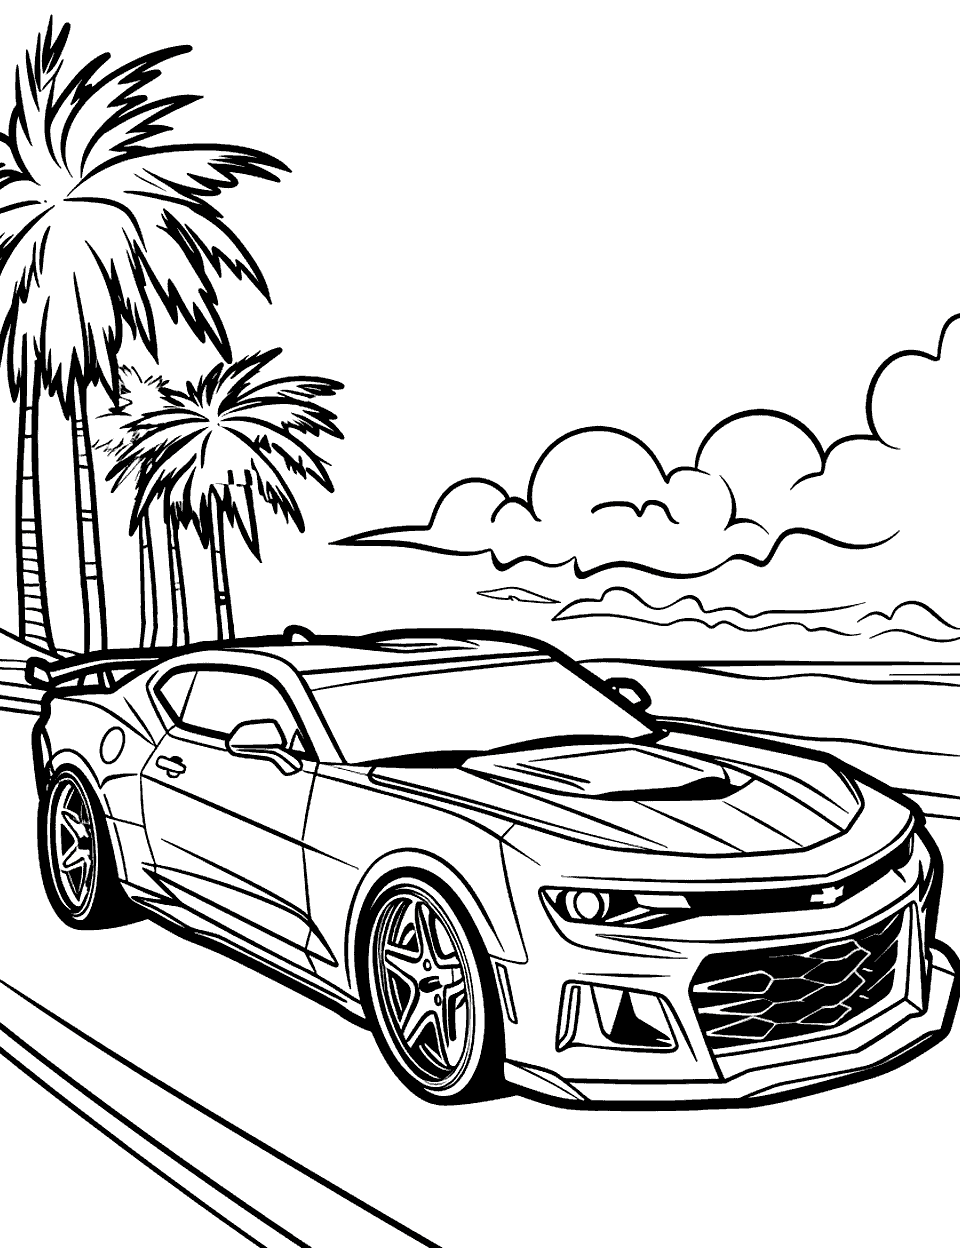 Camaro Sunset Drive Coloring Page - A Chevrolet Camaro driving along a beachside road with palm trees in the background.